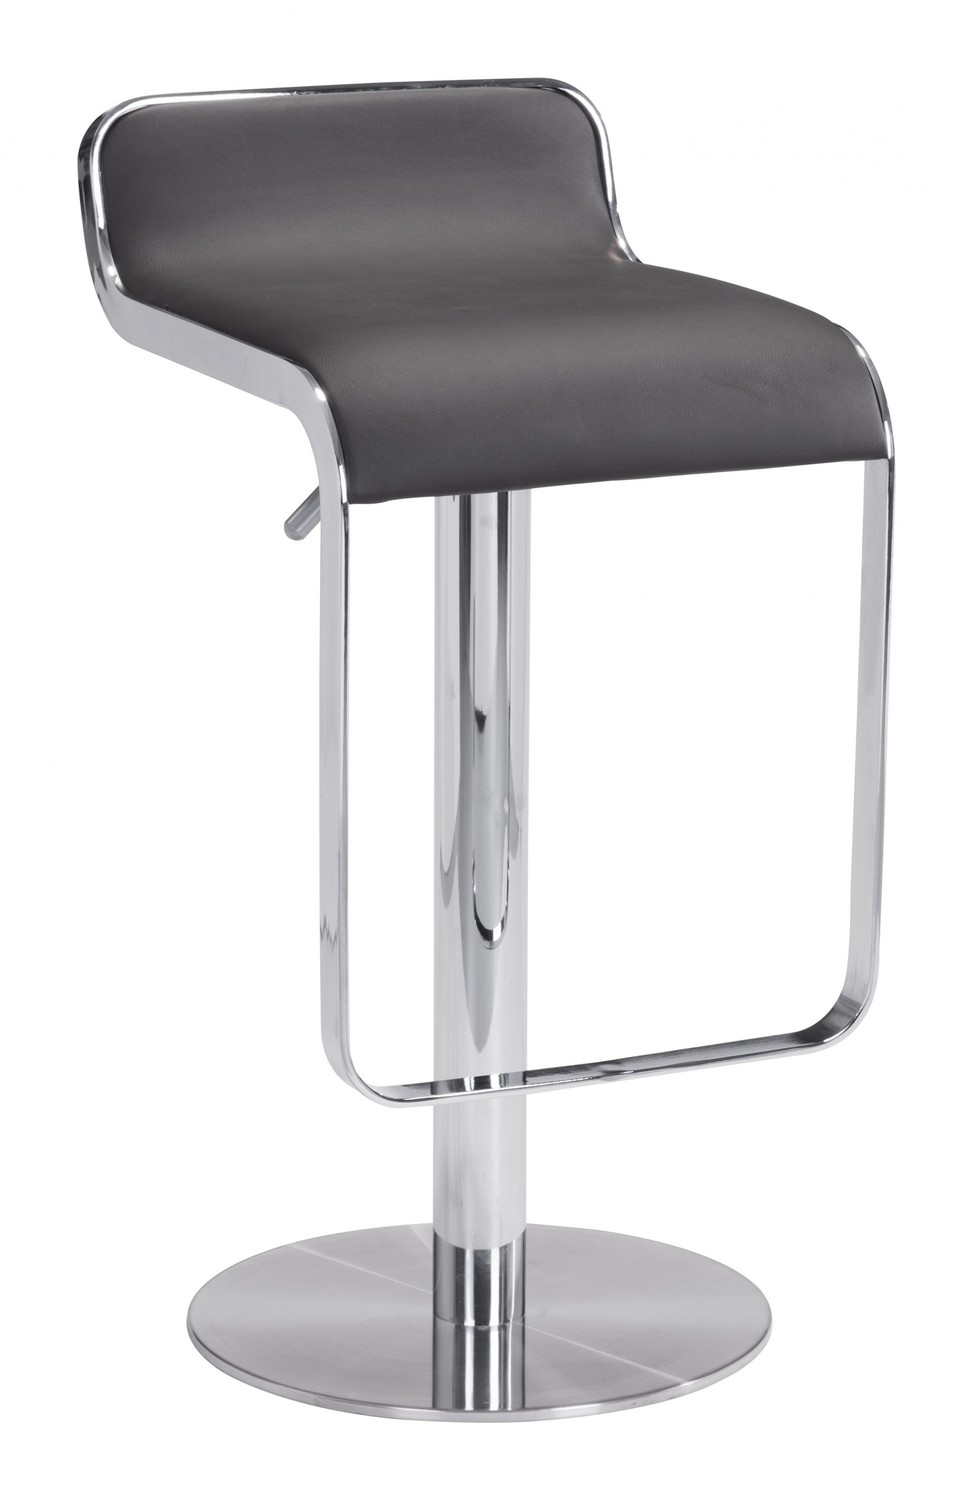 Modern Brown Faux Leather and Chrome Adjustable Pedestal Barstool